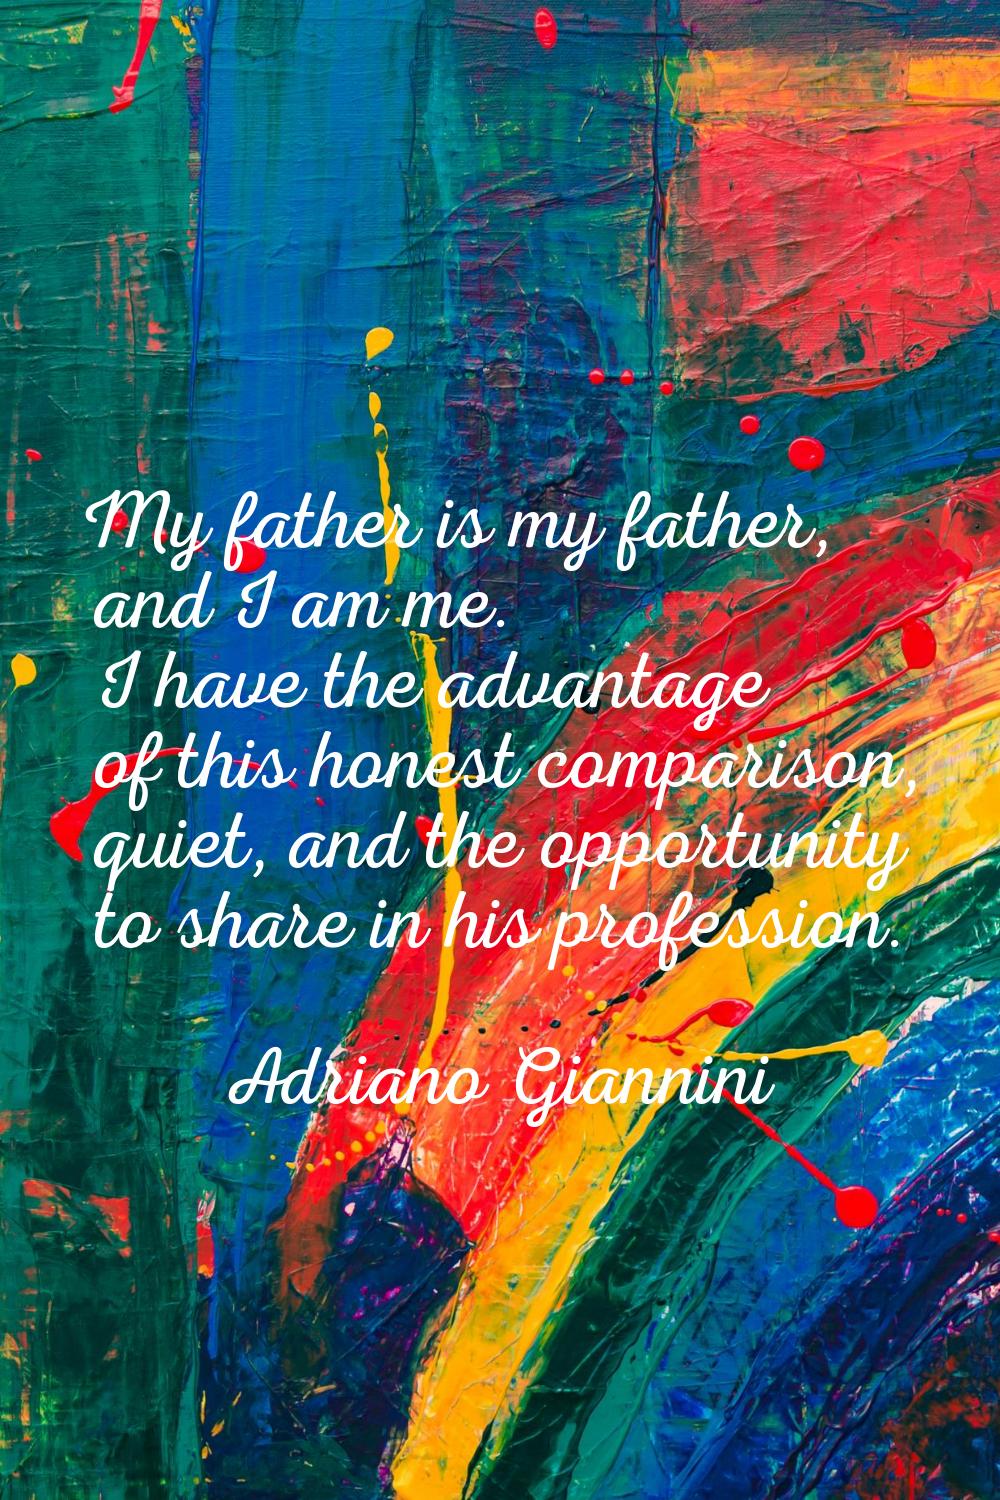 My father is my father, and I am me. I have the advantage of this honest comparison, quiet, and the